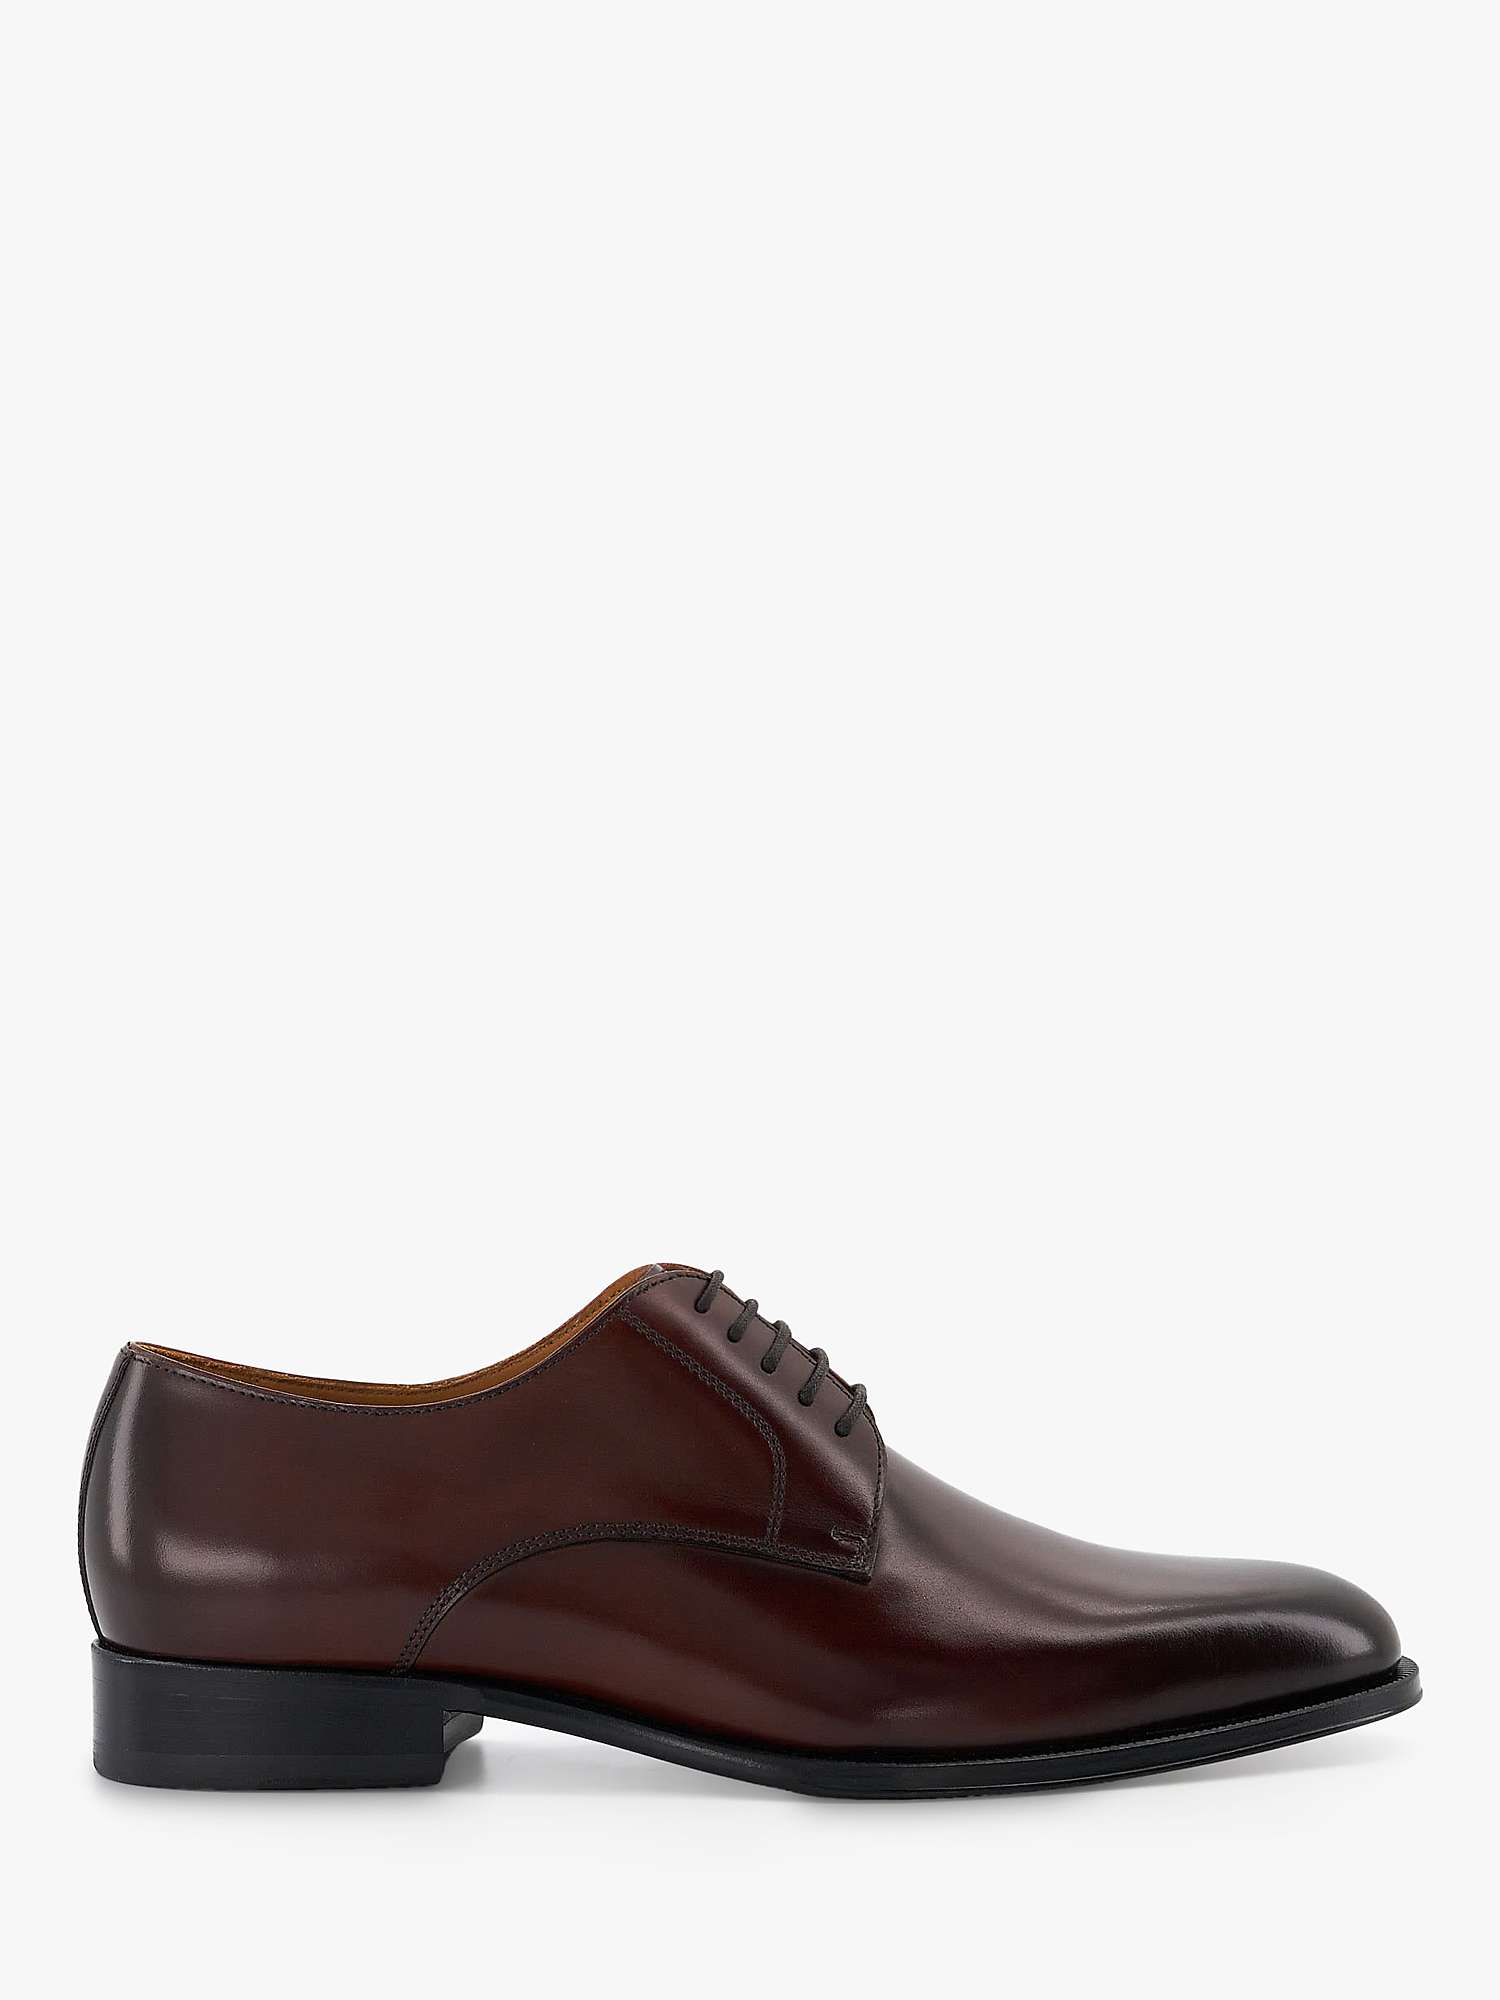 Buy Dune Salisburry Derby Leather Shoes Online at johnlewis.com